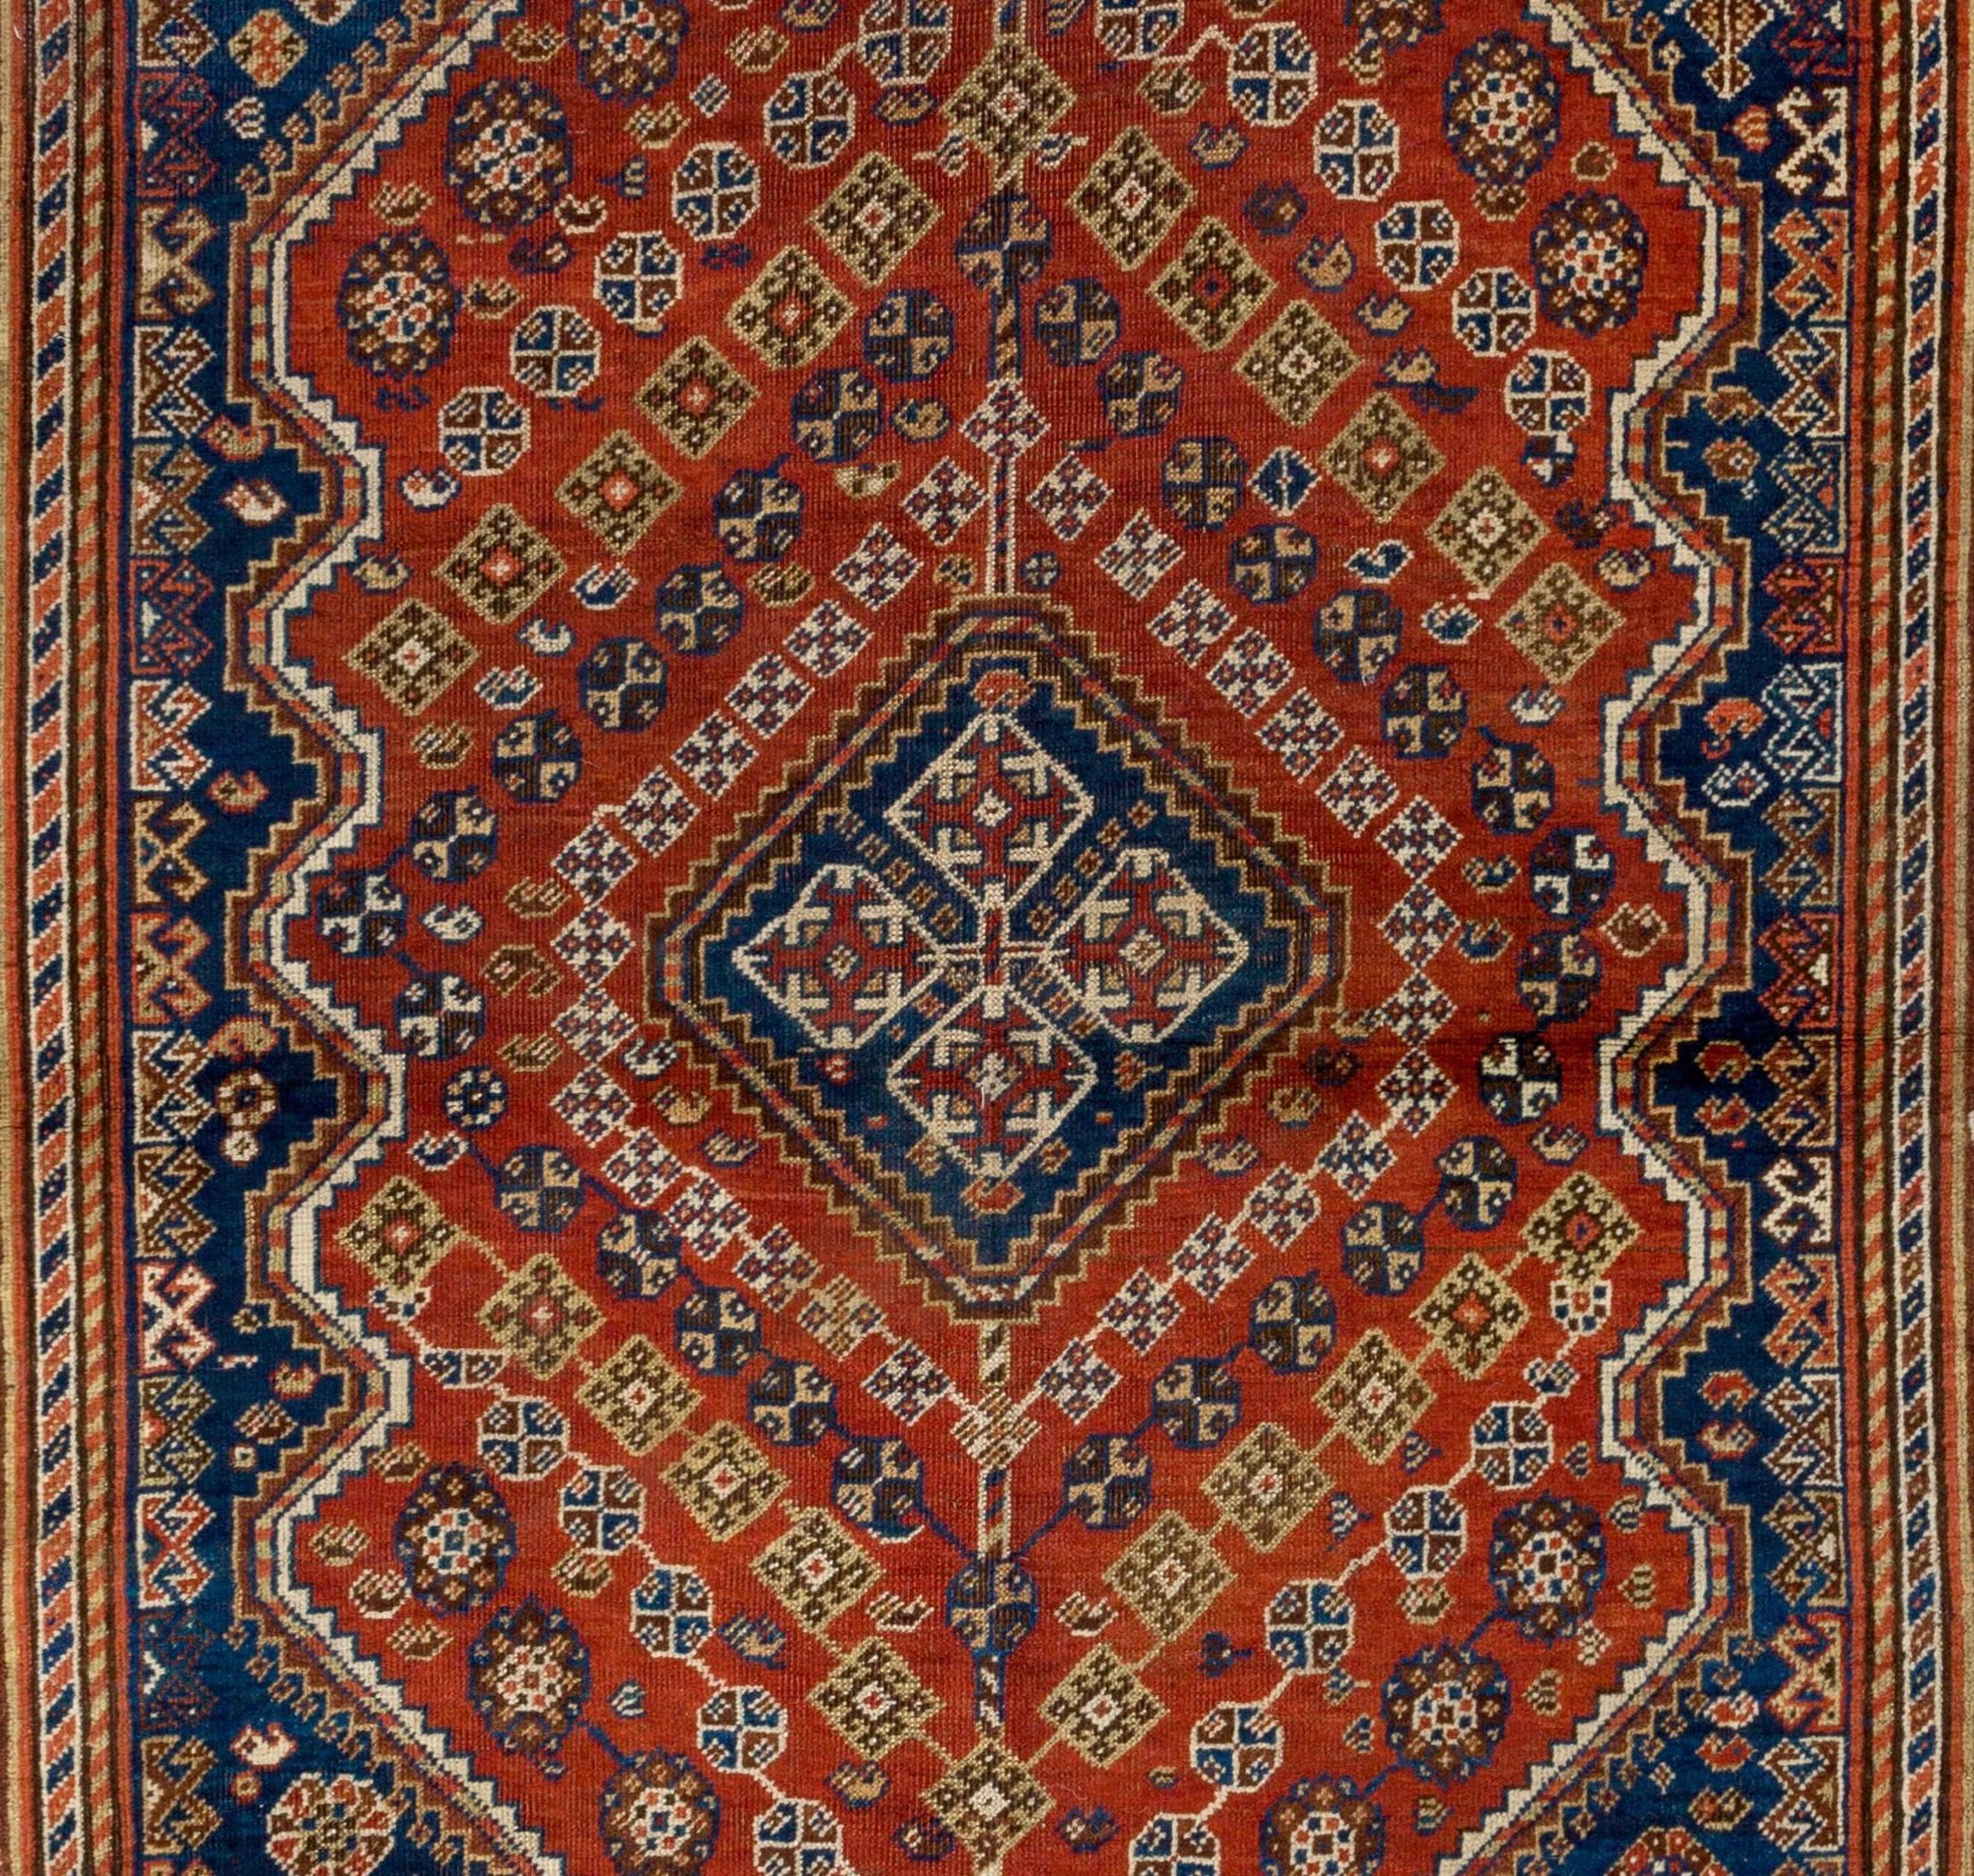 Antique Persian Shiraz Qashqai rug, hand-knotted by the pastoral nomadic Qashqai people in the 19th century made with wool on wool foundation and natural vegetable dyes. The rug has an energetic, lively design, woven with precision and is packed